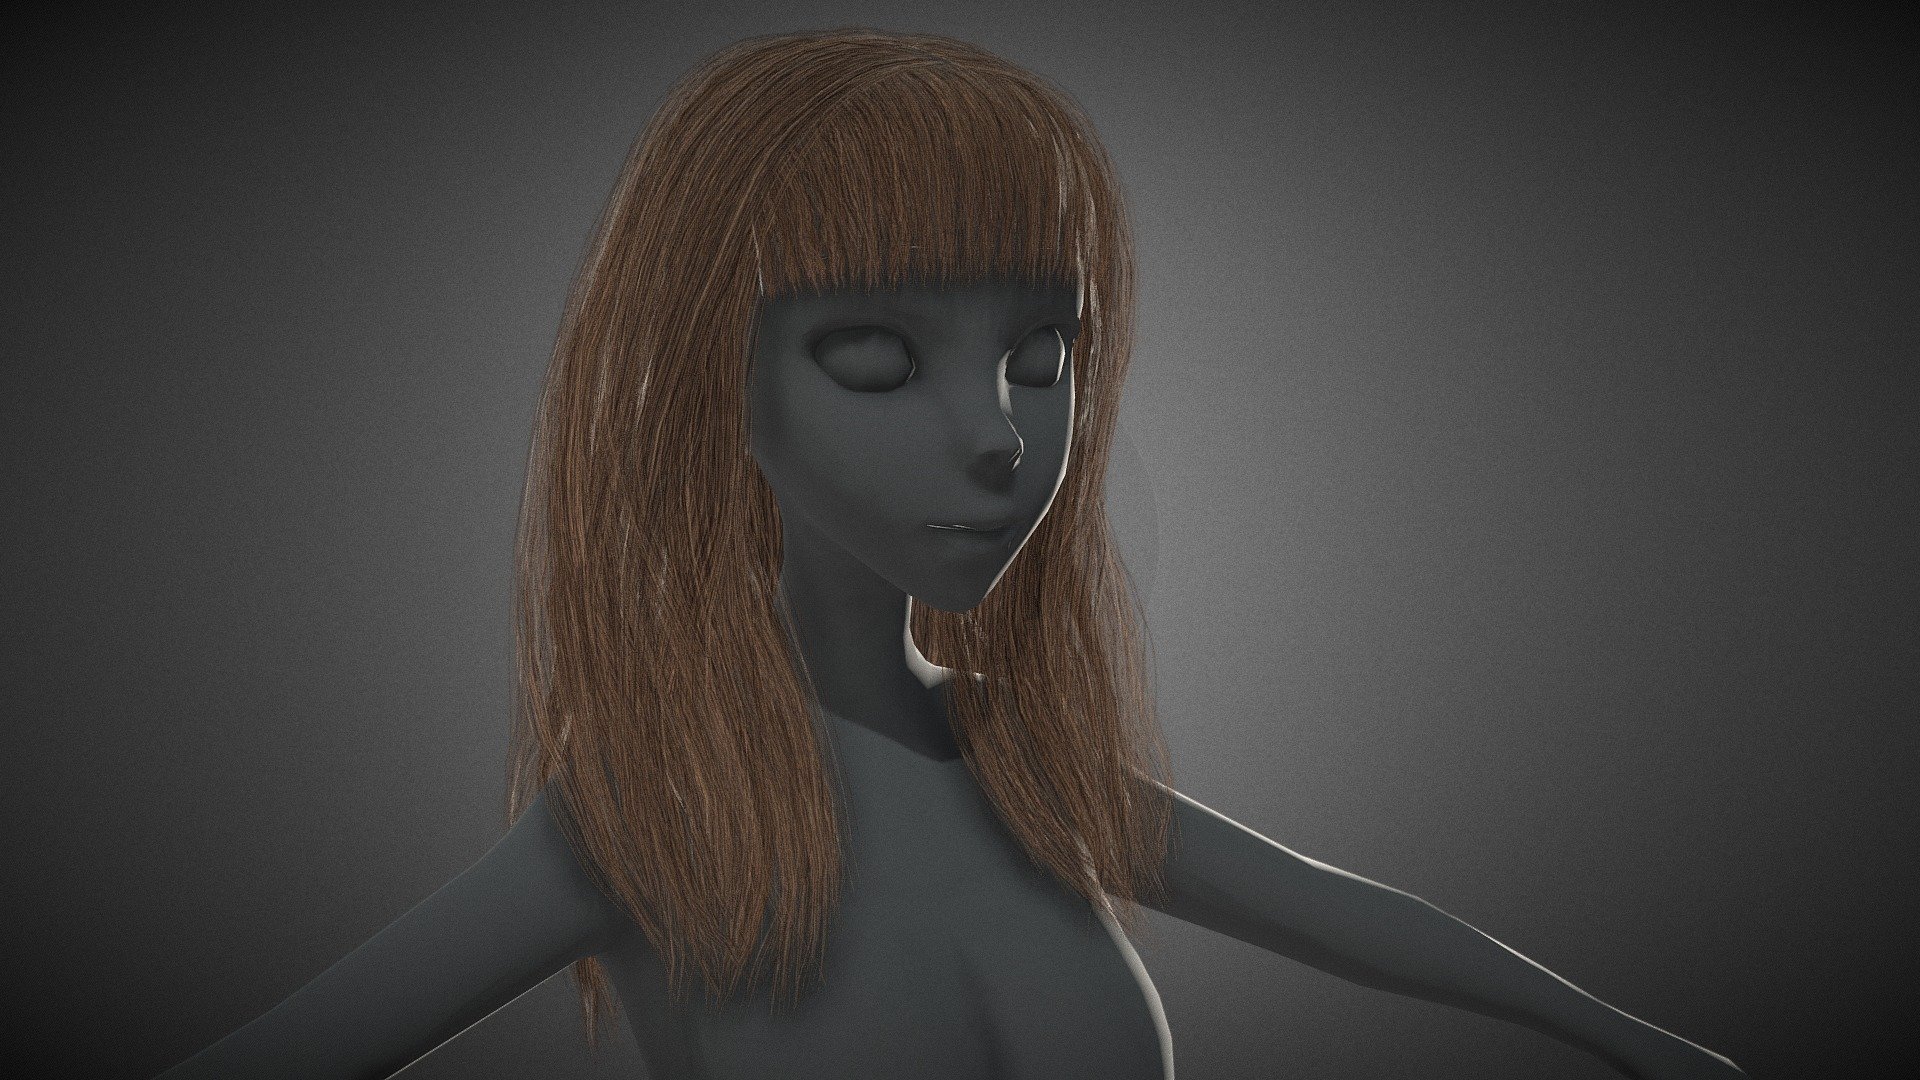 CG StudioX Present :
Female Hair Cards Style 3 - Long Hair 1 lowpoly/PBR




The photo been rendered using Marmoset Toolbag 4 (real time game engine )

The head model is decimated to show how the hair looks on the head.


Features :



Comes with Specular and Metalness PBR 4K texture .

Good topology.

Low polygon geometry.

The Model is prefect for game for both Specular workflow as in Unity and Metalness as in Unreal engine .

The model also rendered using Marmoset Toolbag 4 with both Specular and Metalness PBR and also included in the product with the full texture.

The texture can be easily adjustable .


Texture :



One set of UV for the Hair [Albedo -Normal-Metalness -Roughness-Gloss-Specular-Ao-Alpha-Depth-Direction-ID-Root] (4096*4096).

One set of UV for the Cap [Albedo -Normal-Metalness -Roughness-Gloss-Specular-Alpha] (4096*4096).


Files :
Marmoset Toolbag 4 ,Maya,,FBX,glTF,Blender,OBj with all the textures.




Contact me for if you have any questions.
 - Female Hair Cards Style 3 - Long Hair 1 - Buy Royalty Free 3D model by CG StudioX (@CG_StudioX) 3d model